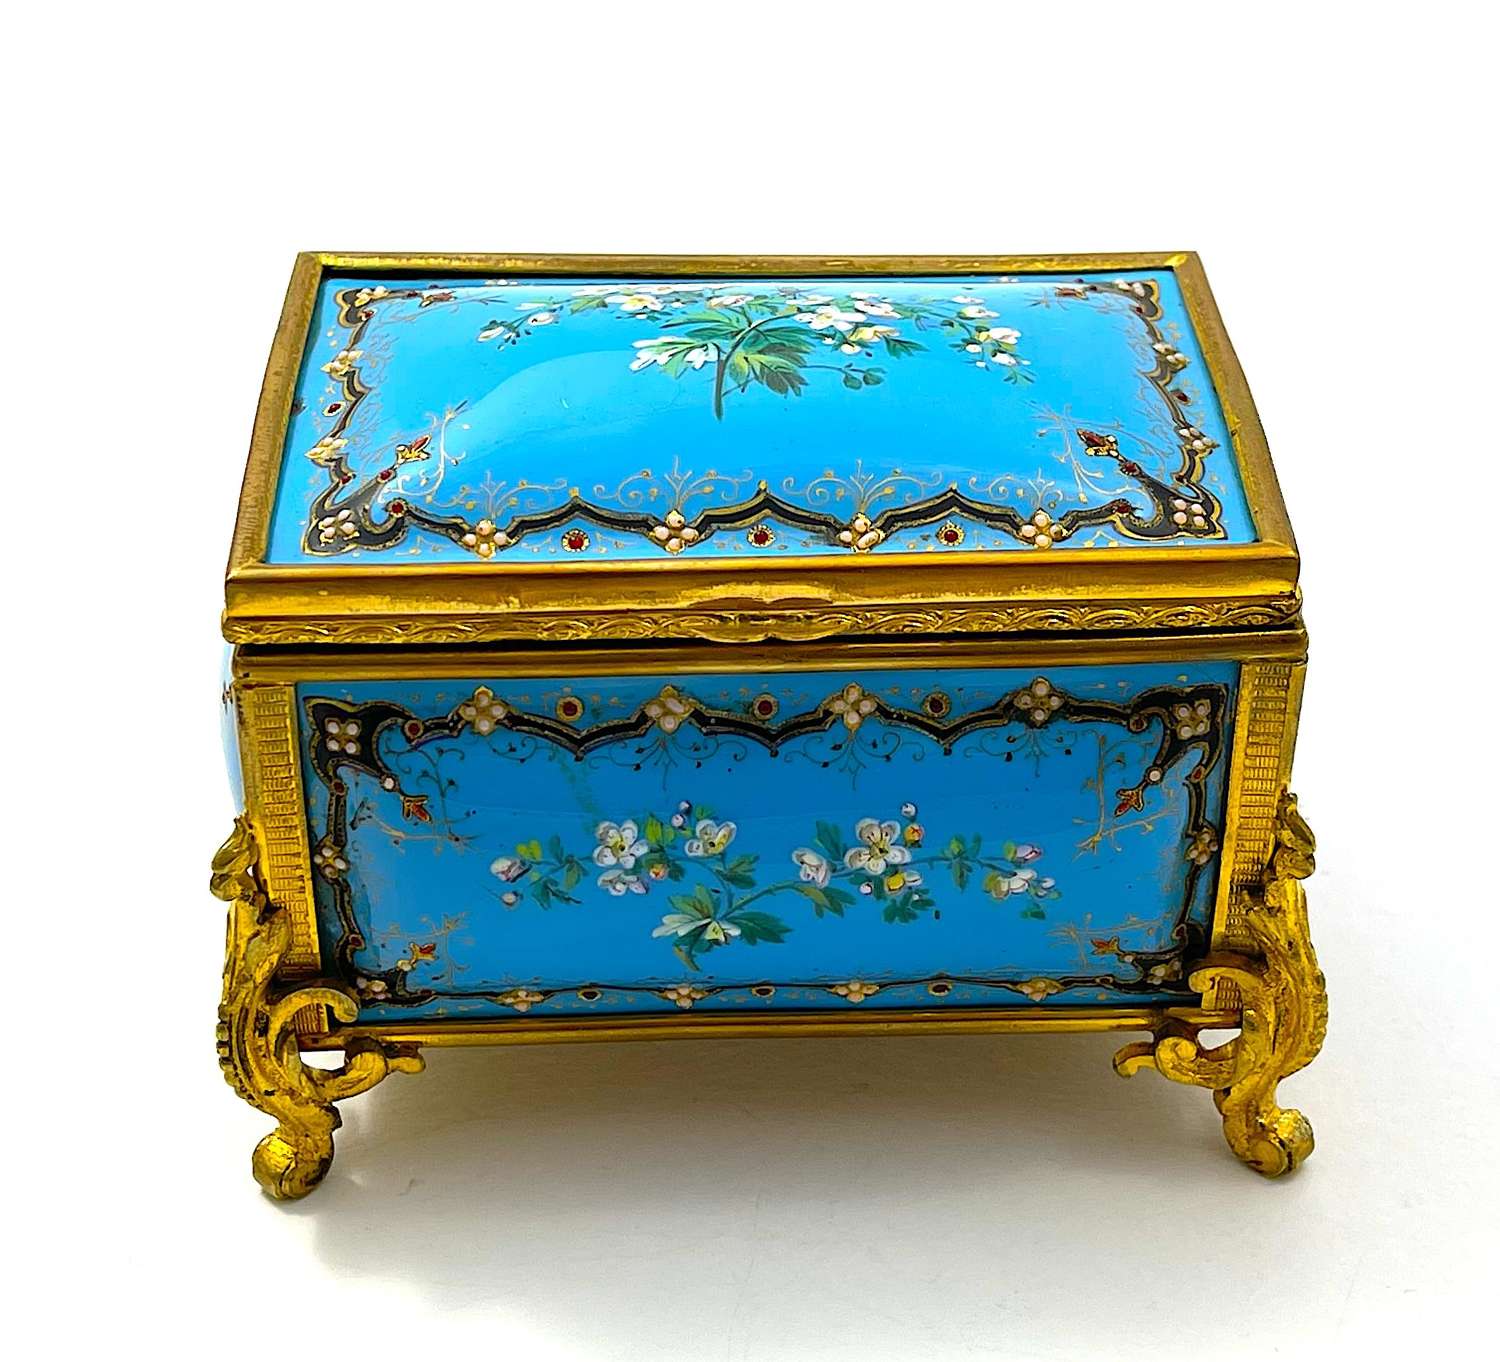 A  Palais Royal Antique French 'Bombe' Jewel Casket by Tahan